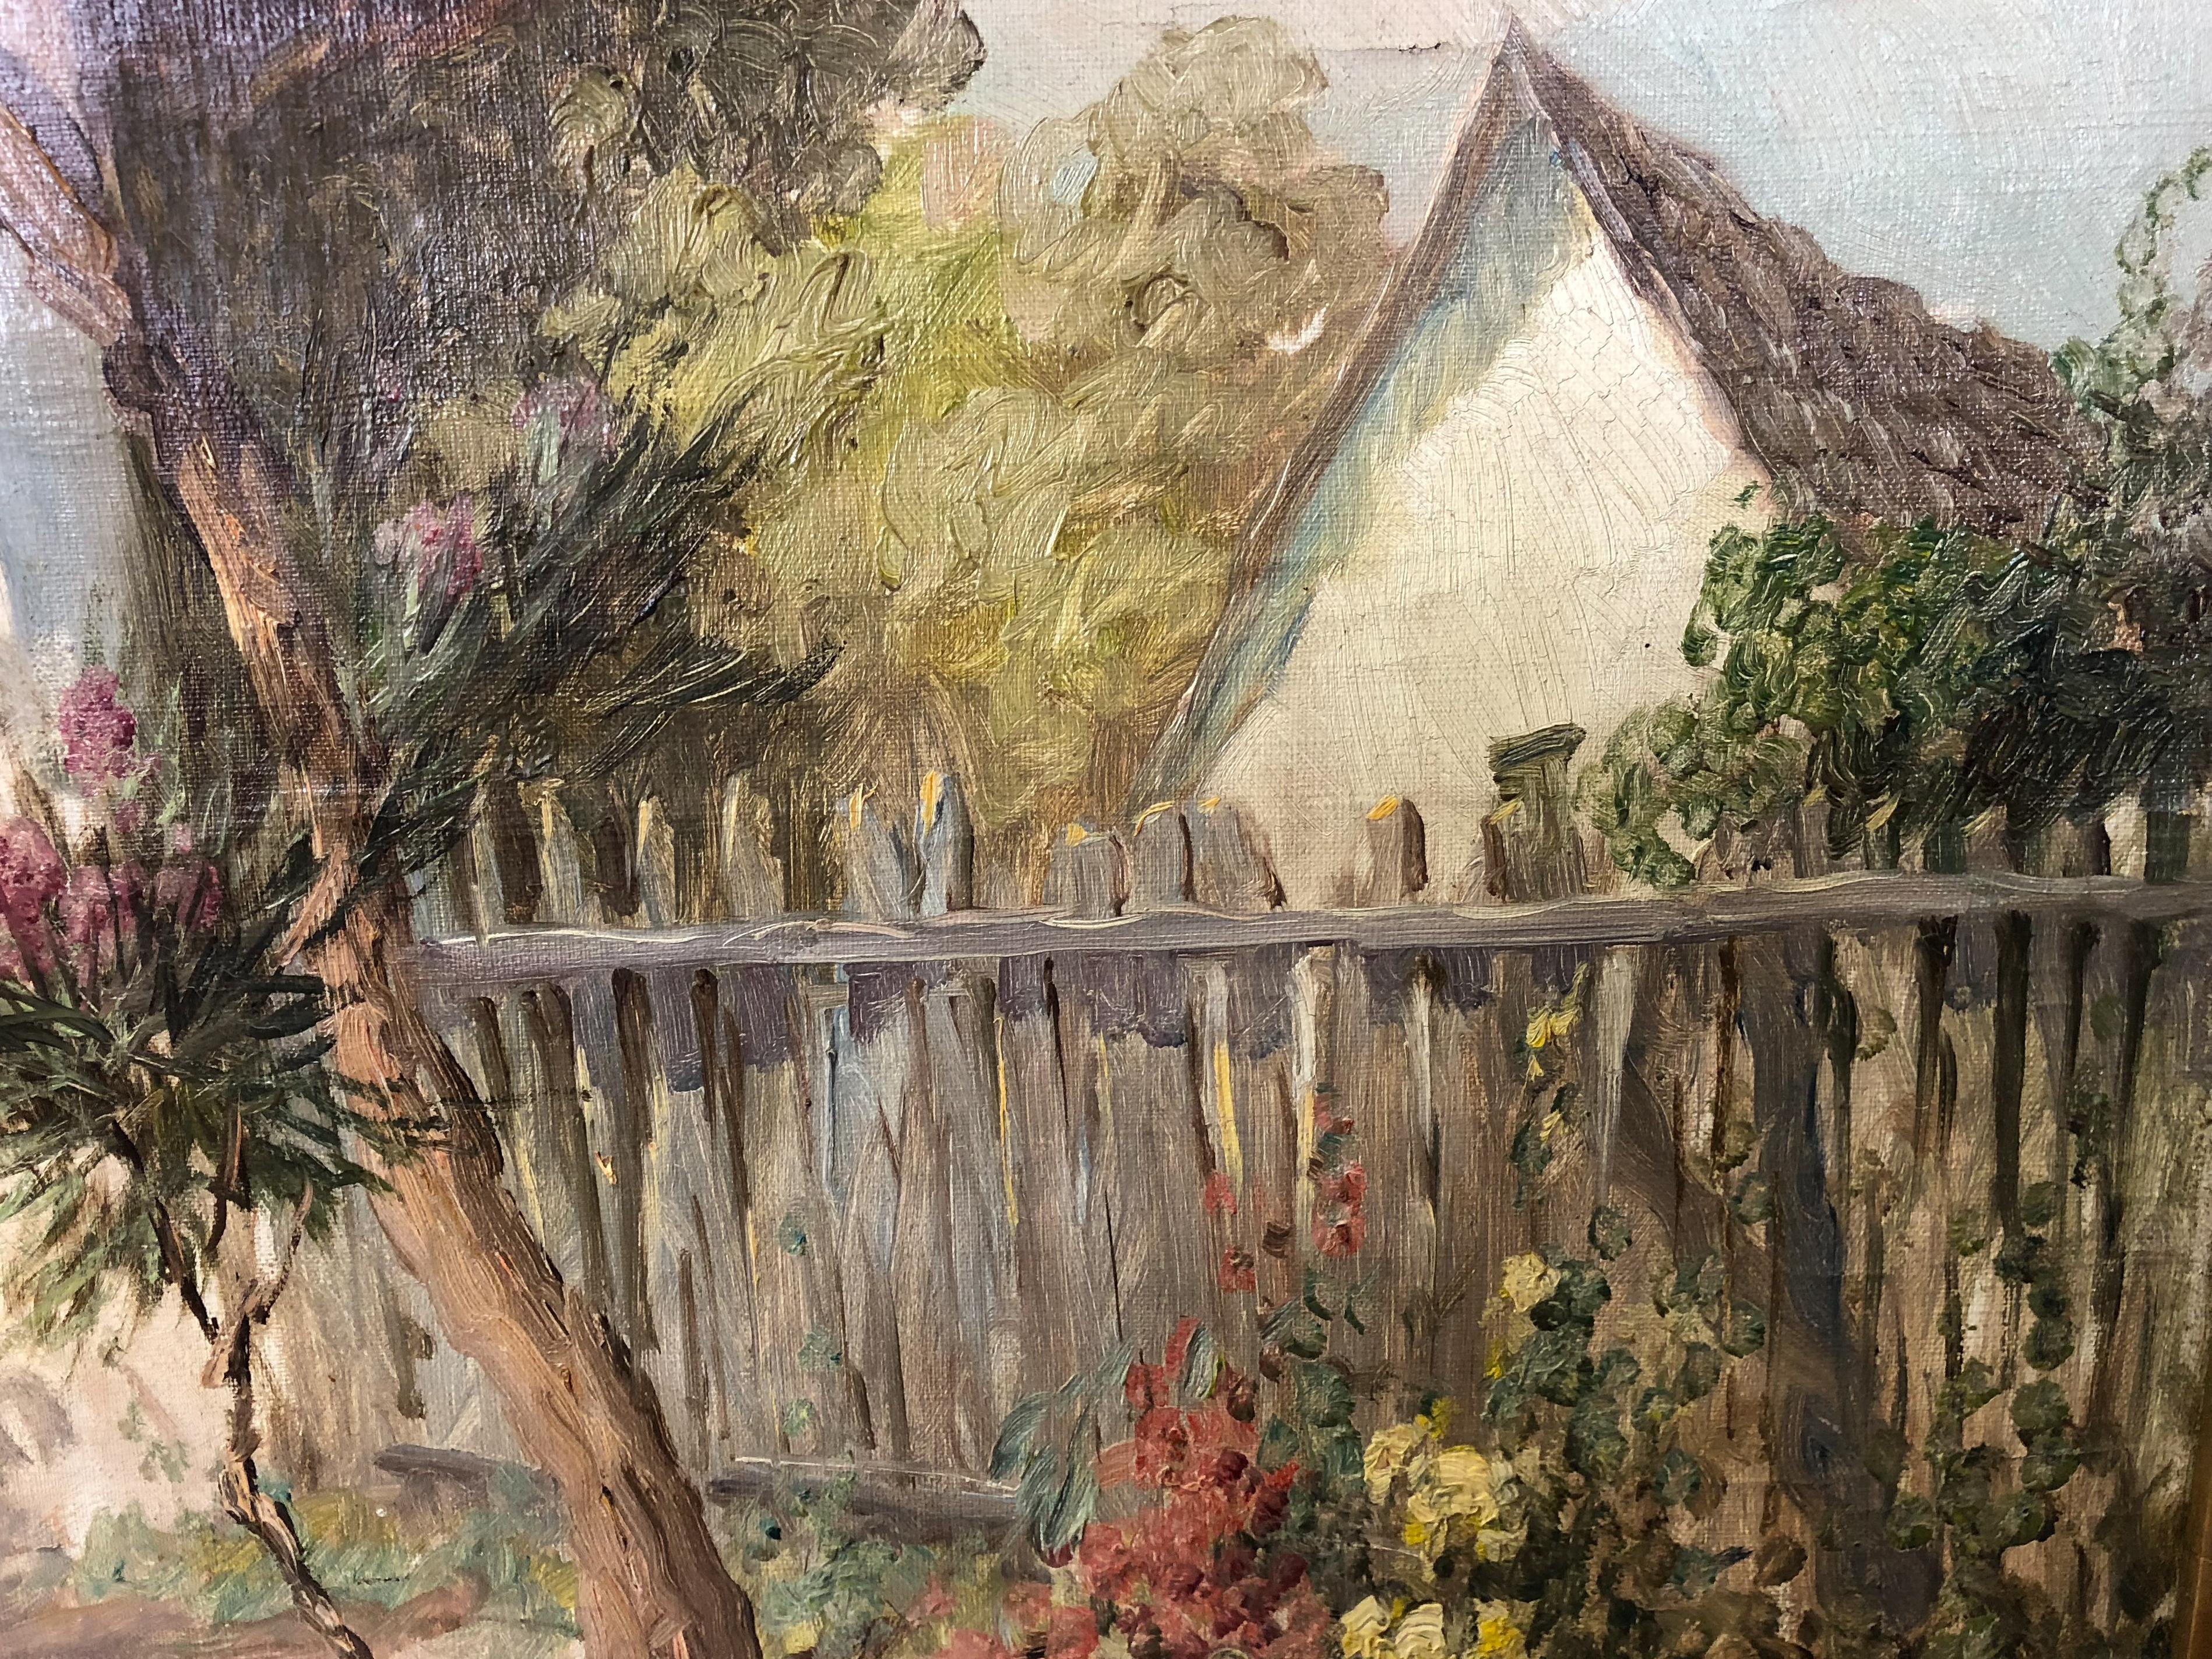 Oil painting of a family enjoying a sunny day outside a cottage by Hungarian artist Agoston Acs (1881-1947). Signed lower right.

